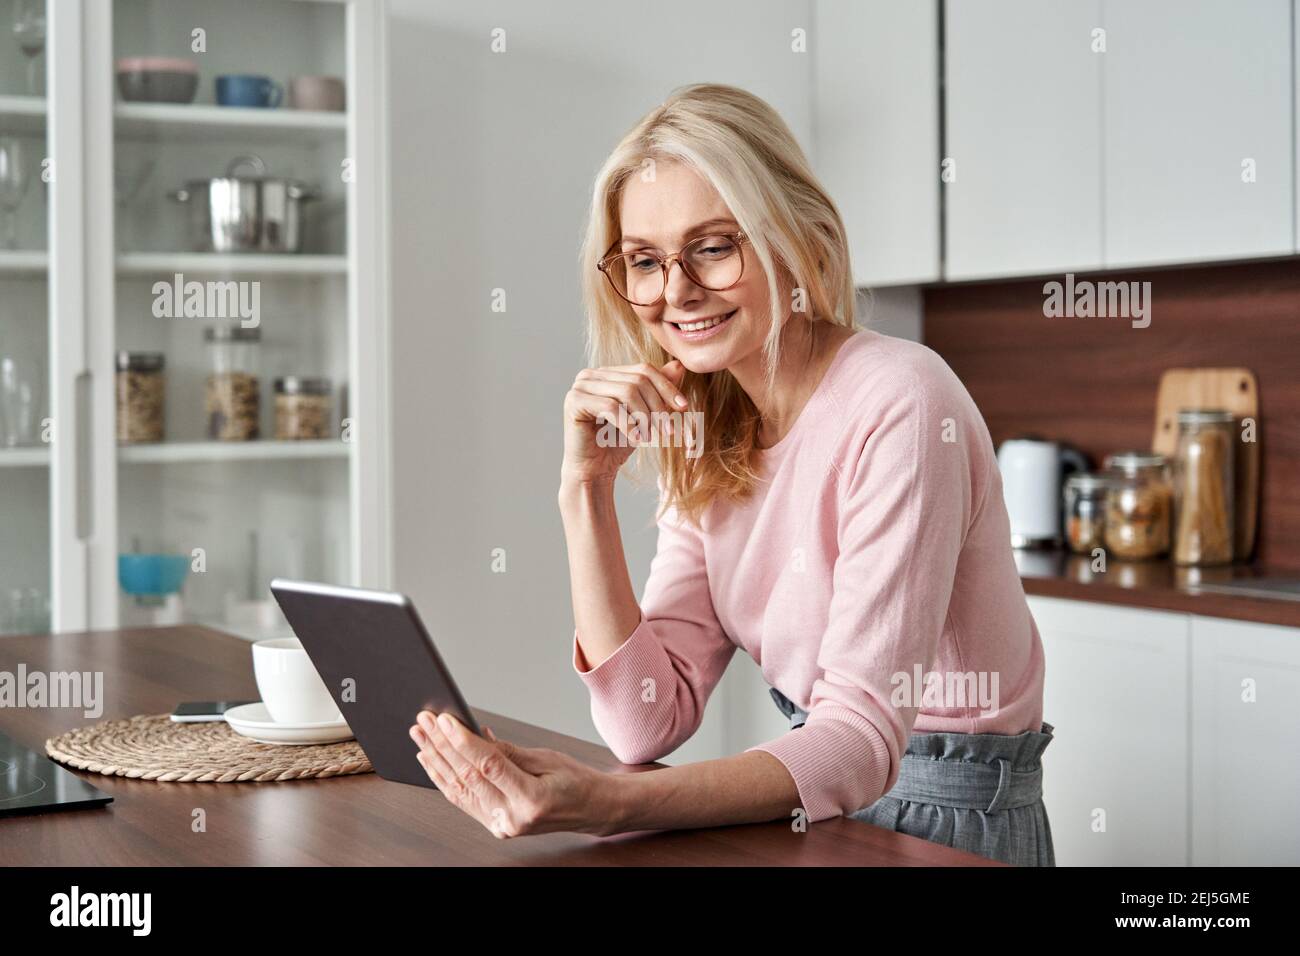 Happy middle aged 50 years old woman using tablet at home. Stock Photo